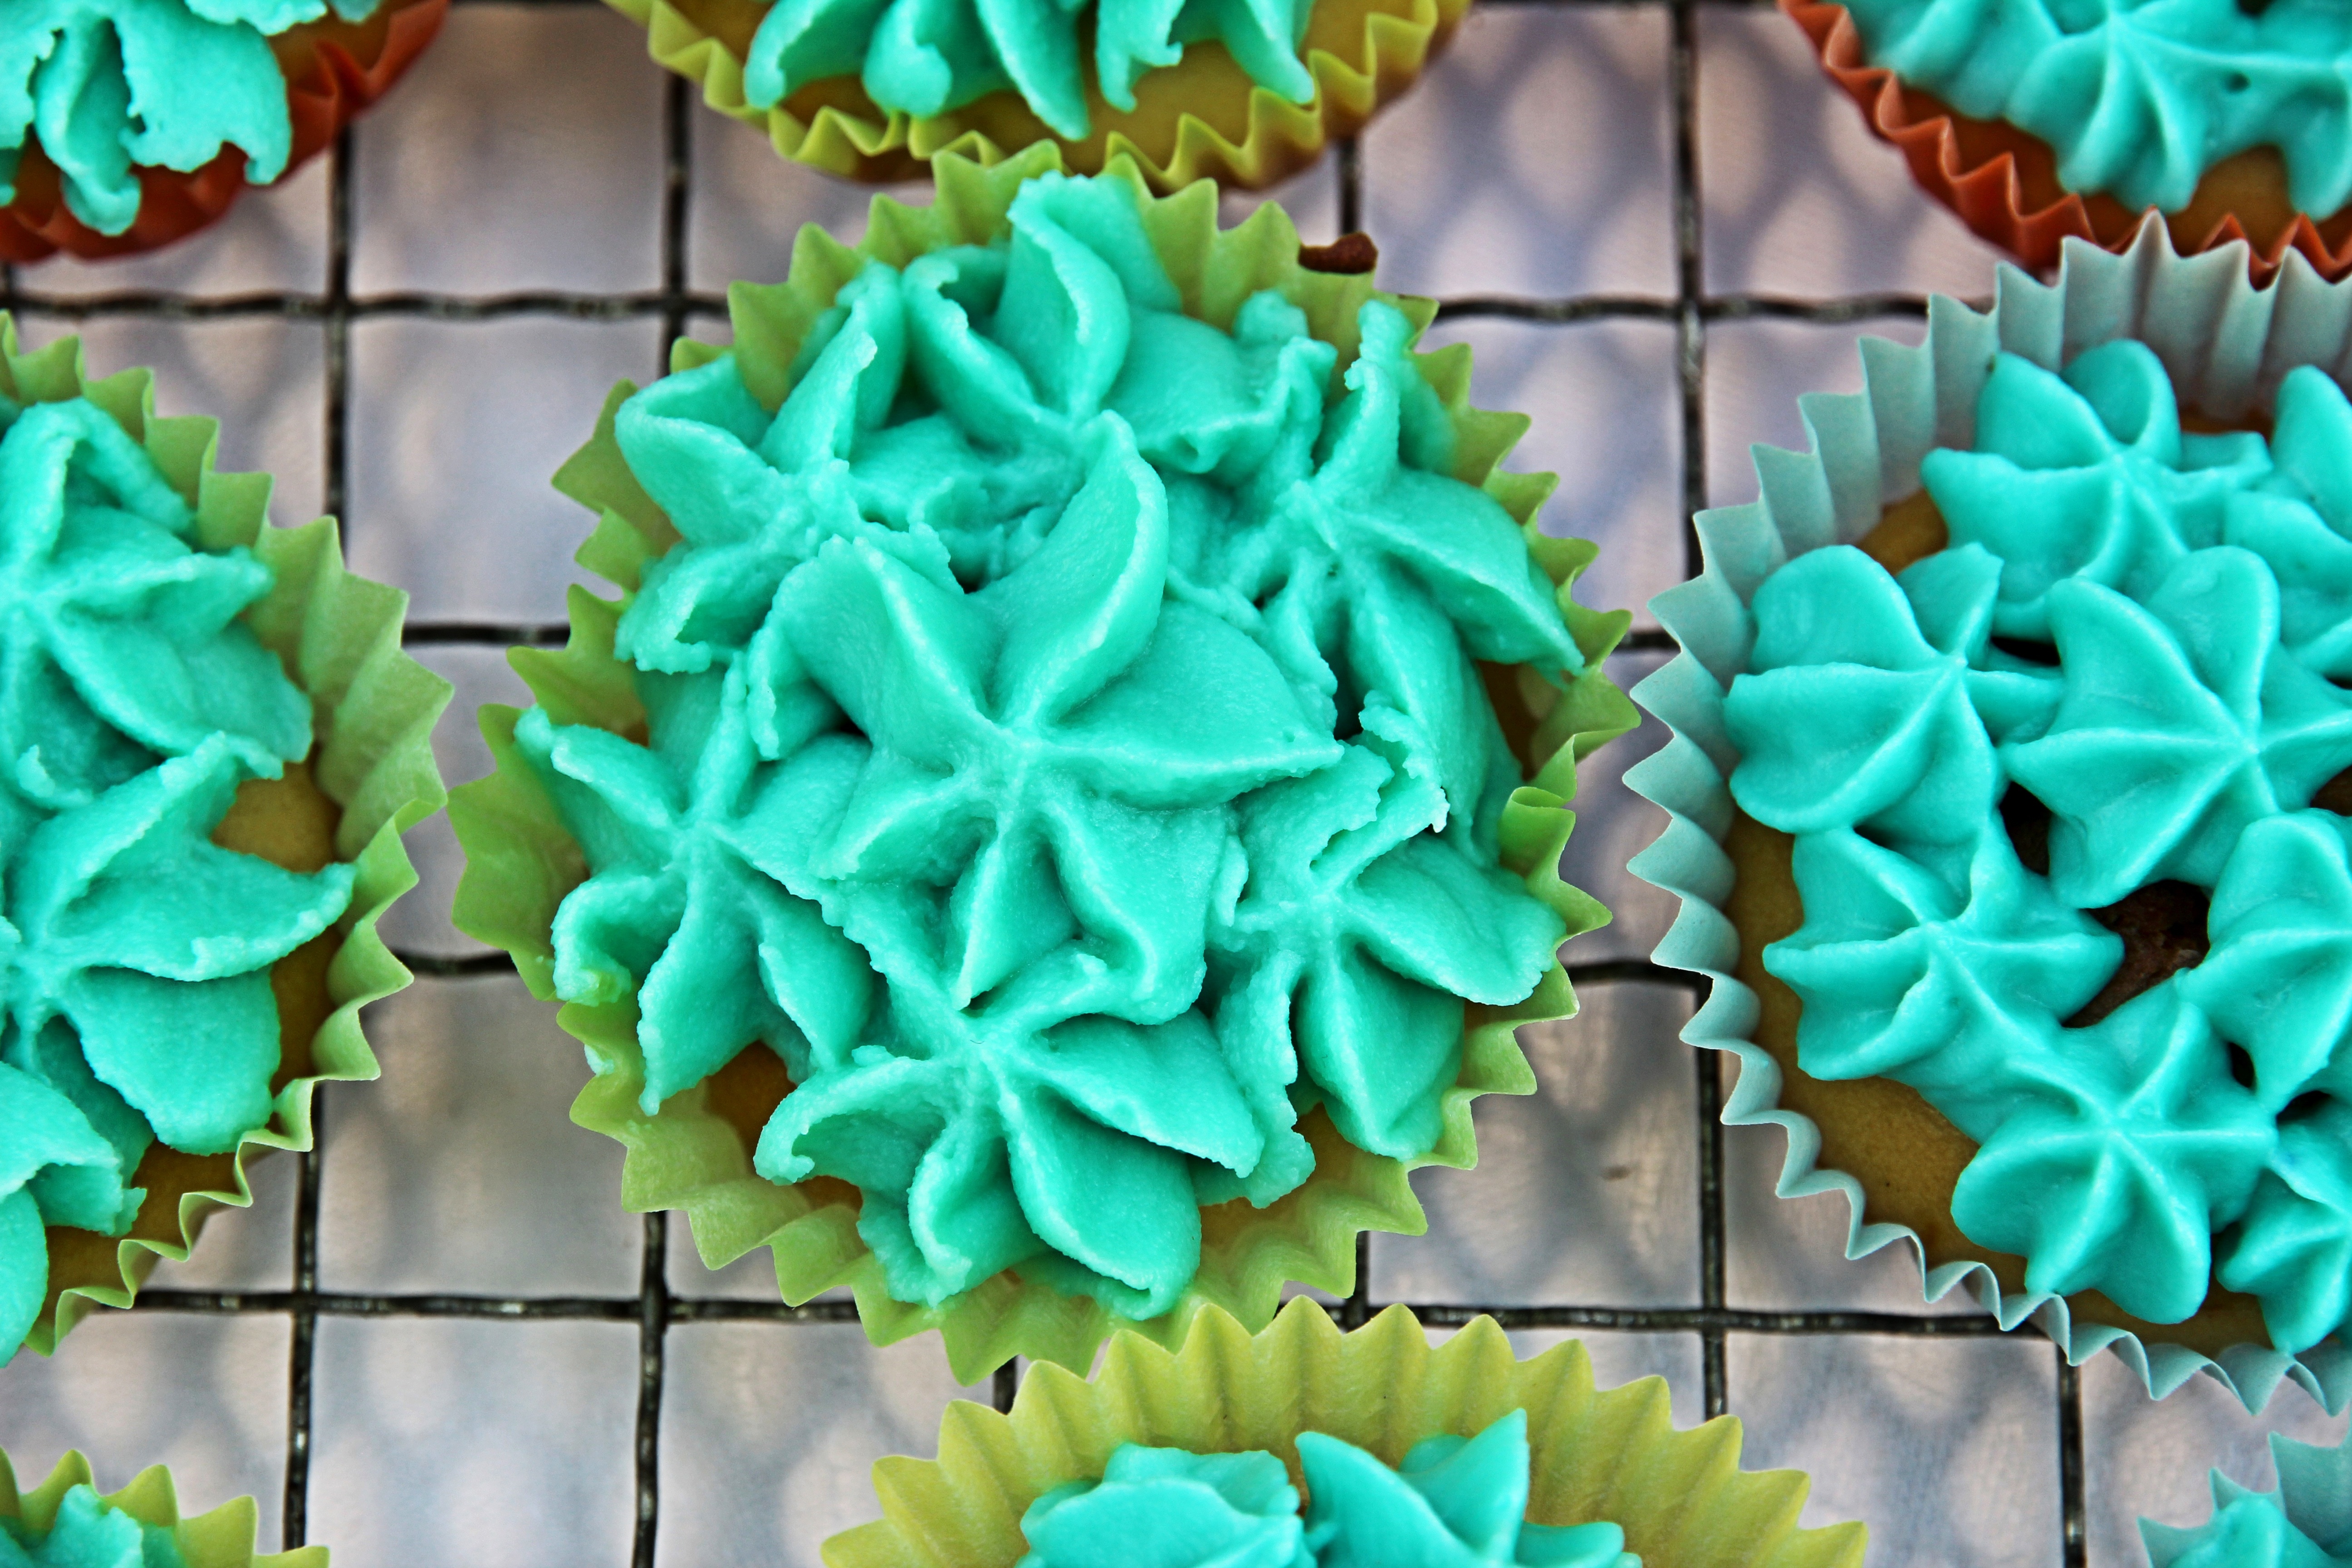 cupcakes with flower shape icings